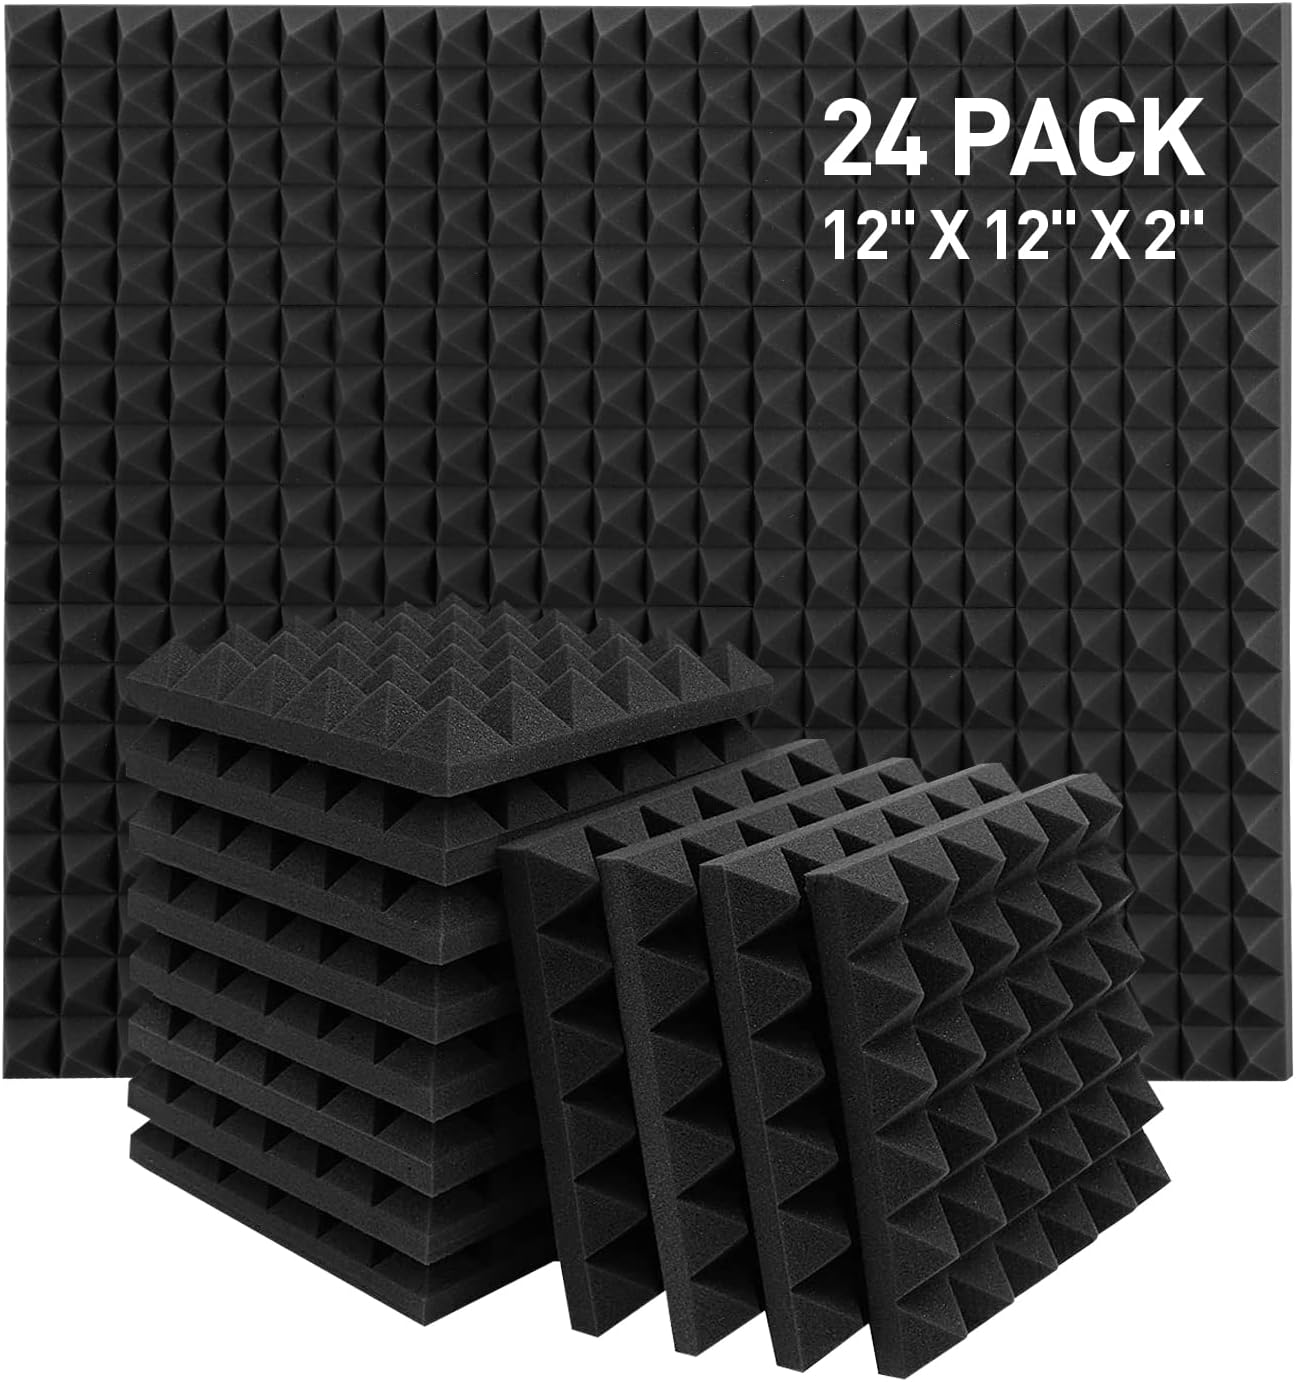 HERTBER 24 Pack Acoustic Panels, 12 x 12 x 2 Inches Sound Proof Foam Panels for Walls, Acoustic Foam Panels, Soundproof Wall Panels, Flame Retardant Sound Panels